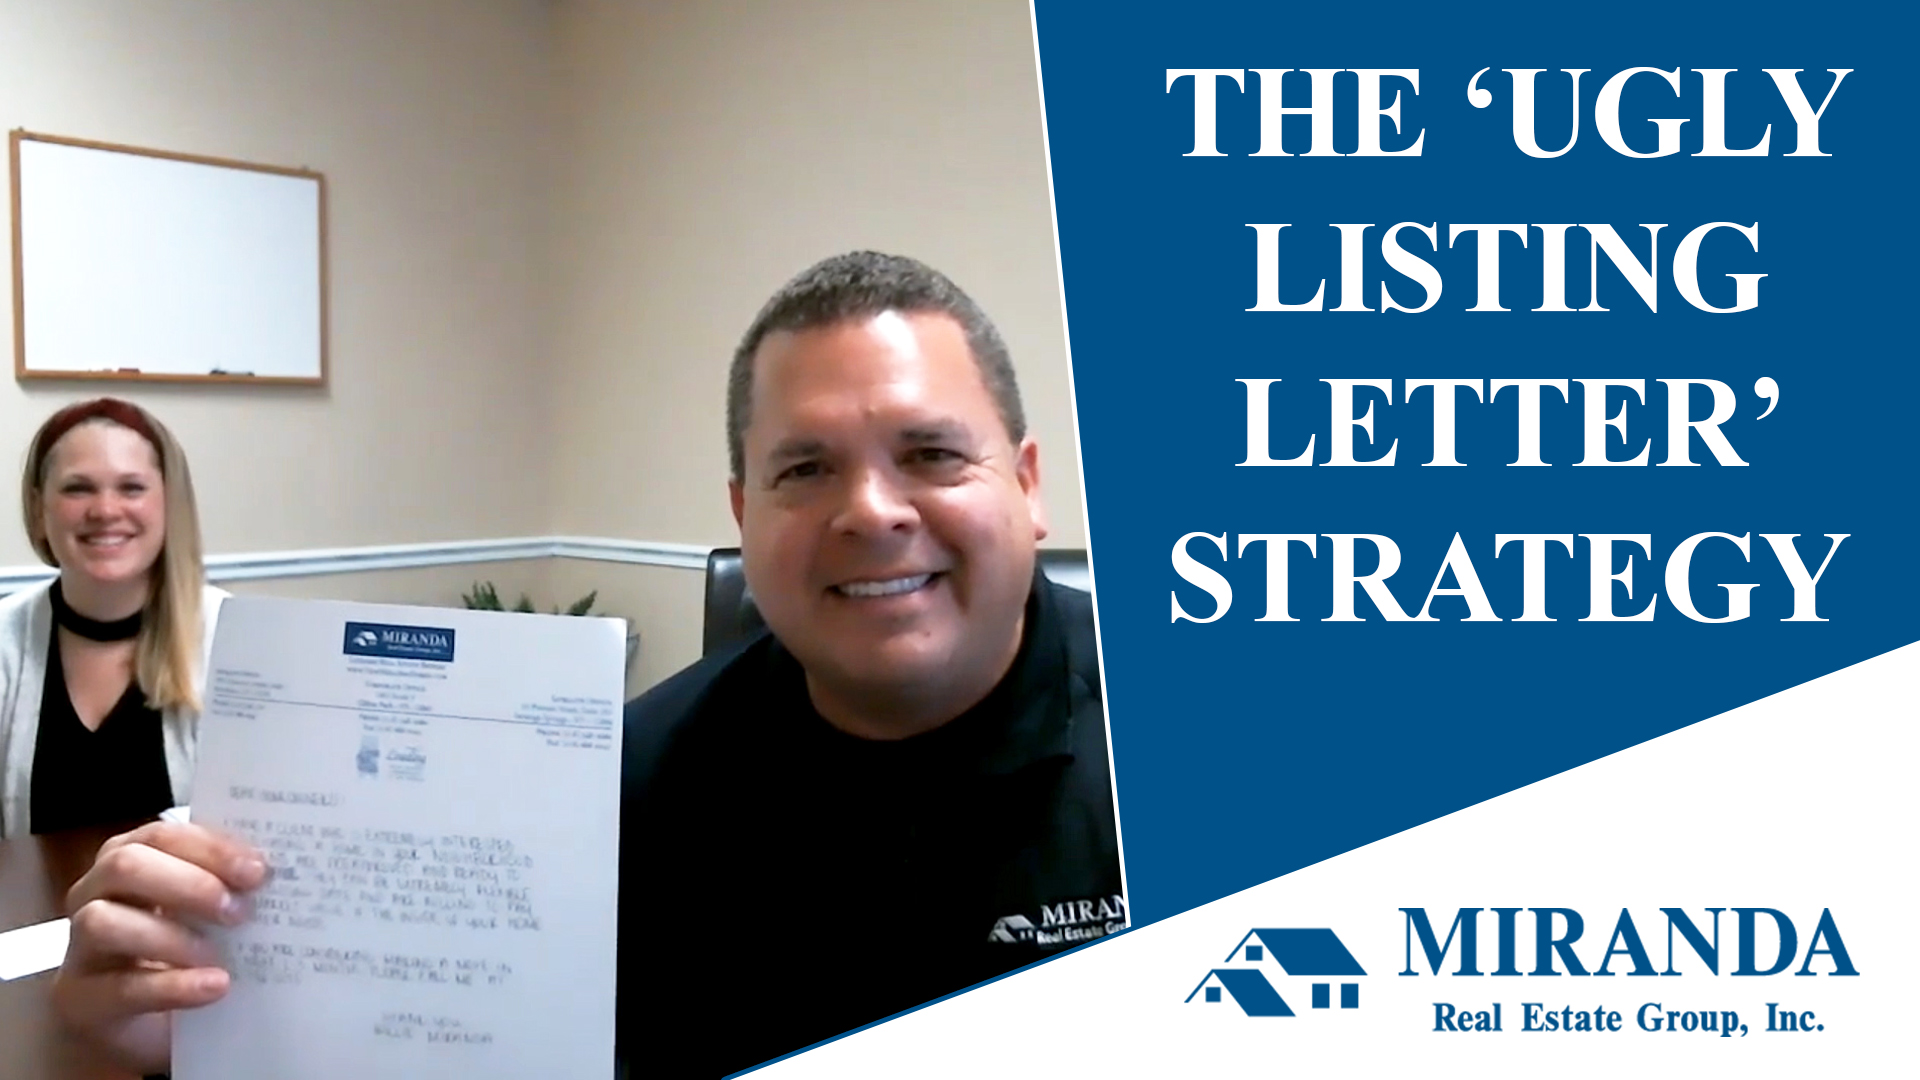 A Great Strategy for Finding Off-Market Listings